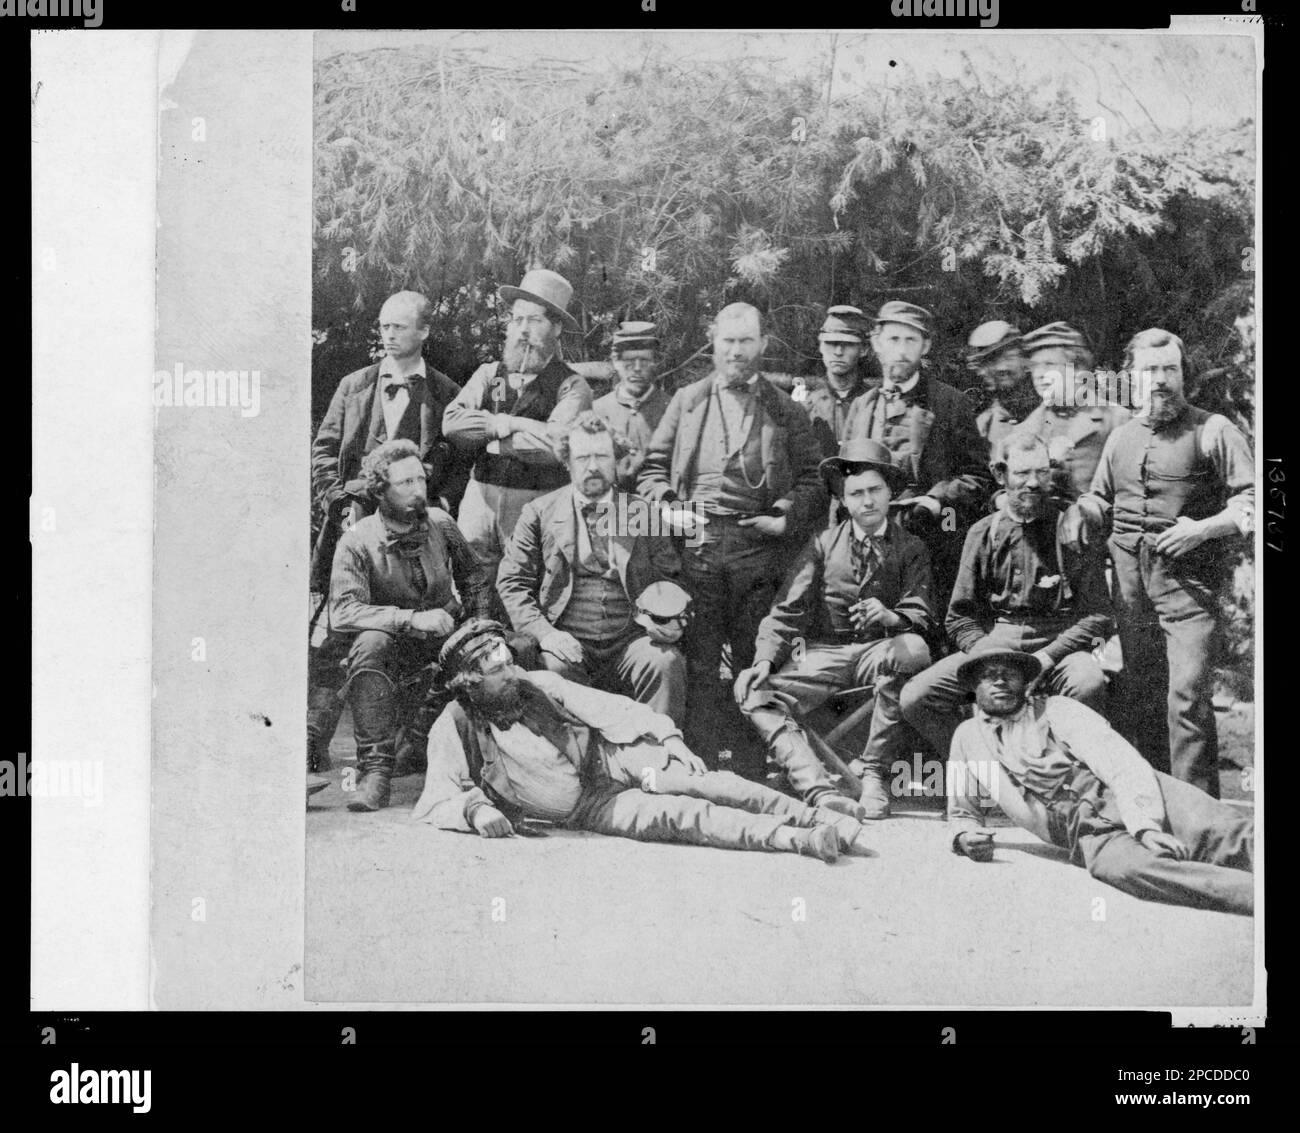 Group at Cumberland, May, 1862. Civil War Photograph Collection , Original negative may be available: LC-B811-636. Pinkerton, Allan, 1819-1884, Military service, Pinkerton, Robert A, (Robert Allan), 1848-1907, Military service, United States, History, Civil War, 1861-1865, Military personnel, Union, Maryland, Cumberland, Guards, Union, Maryland, Cumberland, 1860-1870. Stock Photo